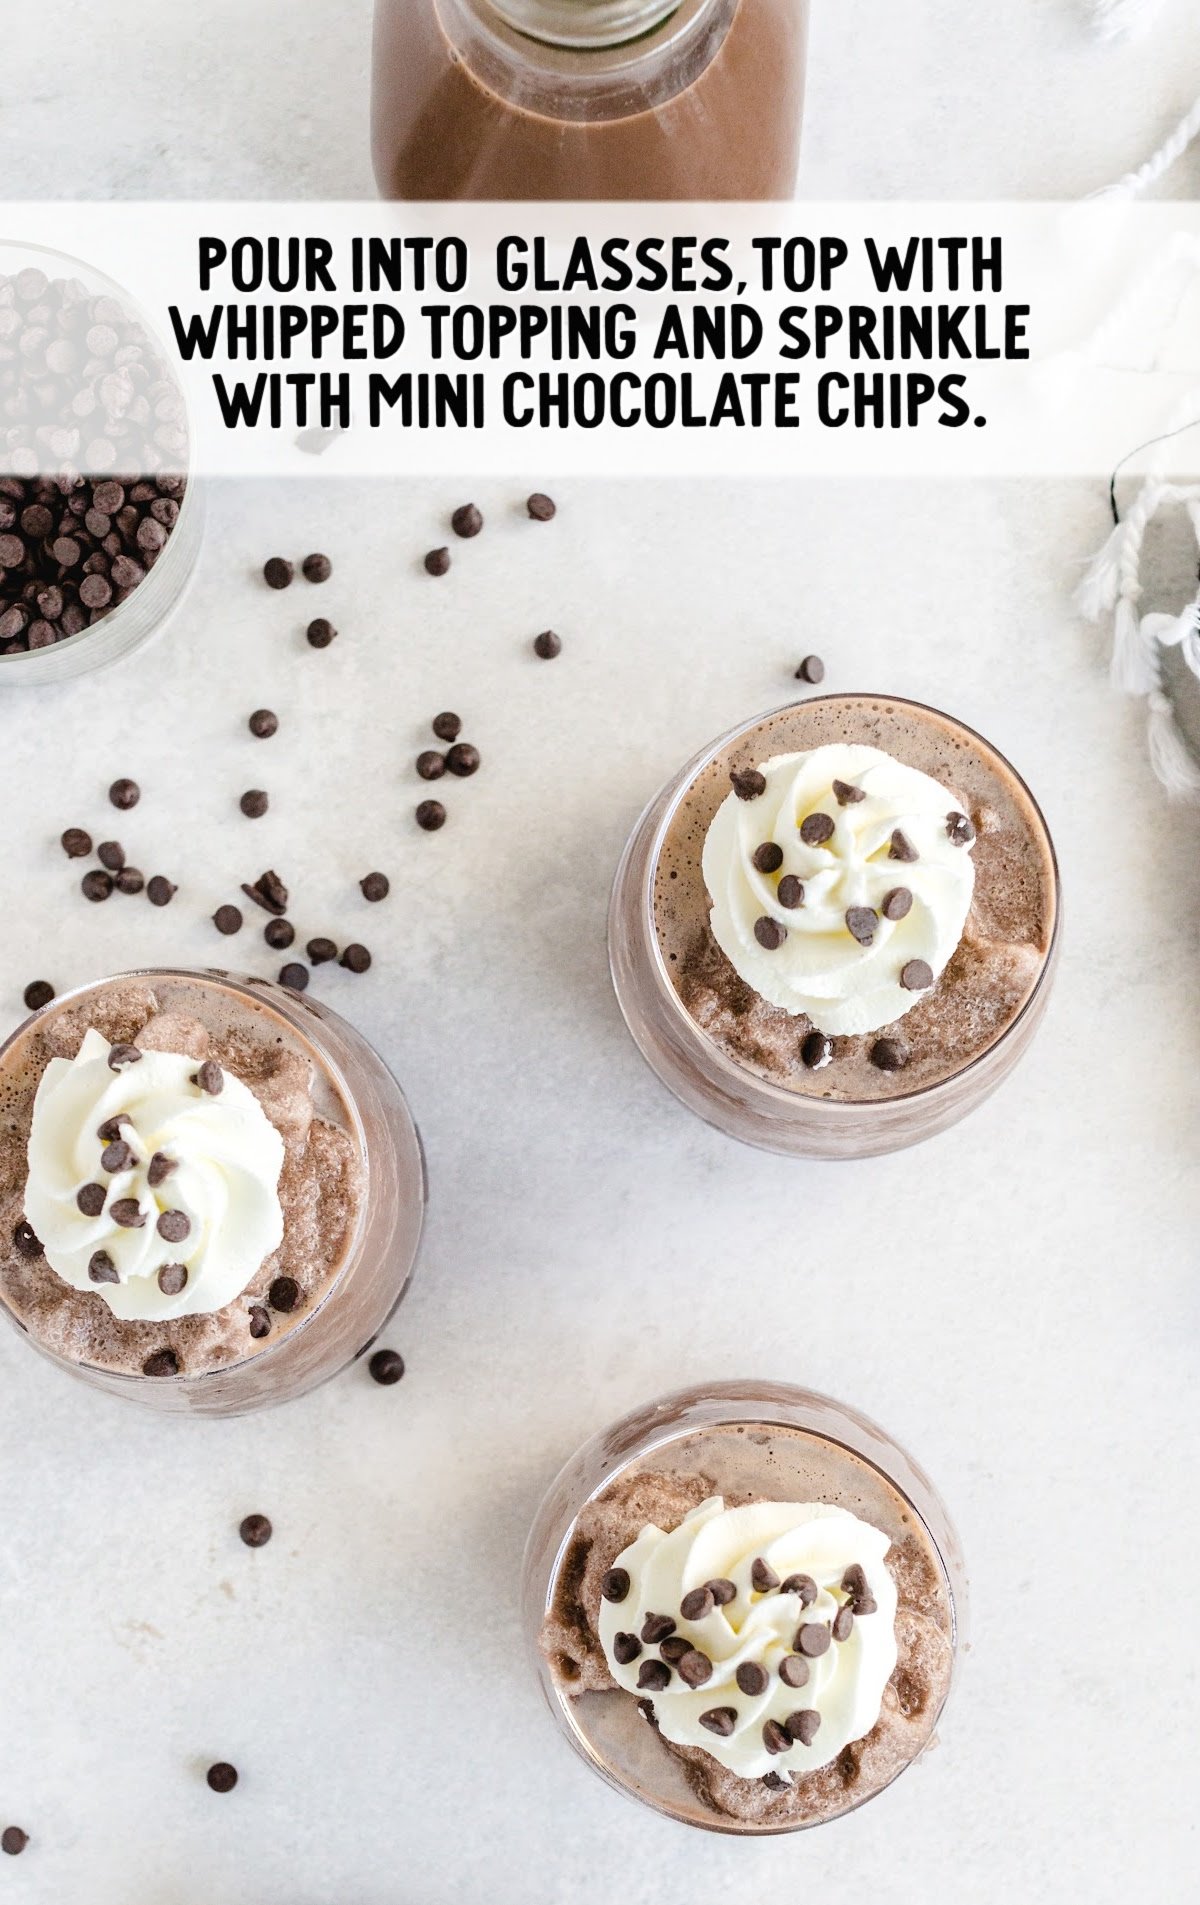 Frozen Hot Chocolate topped with whipped cream and sprinkled with mini chocolate chips